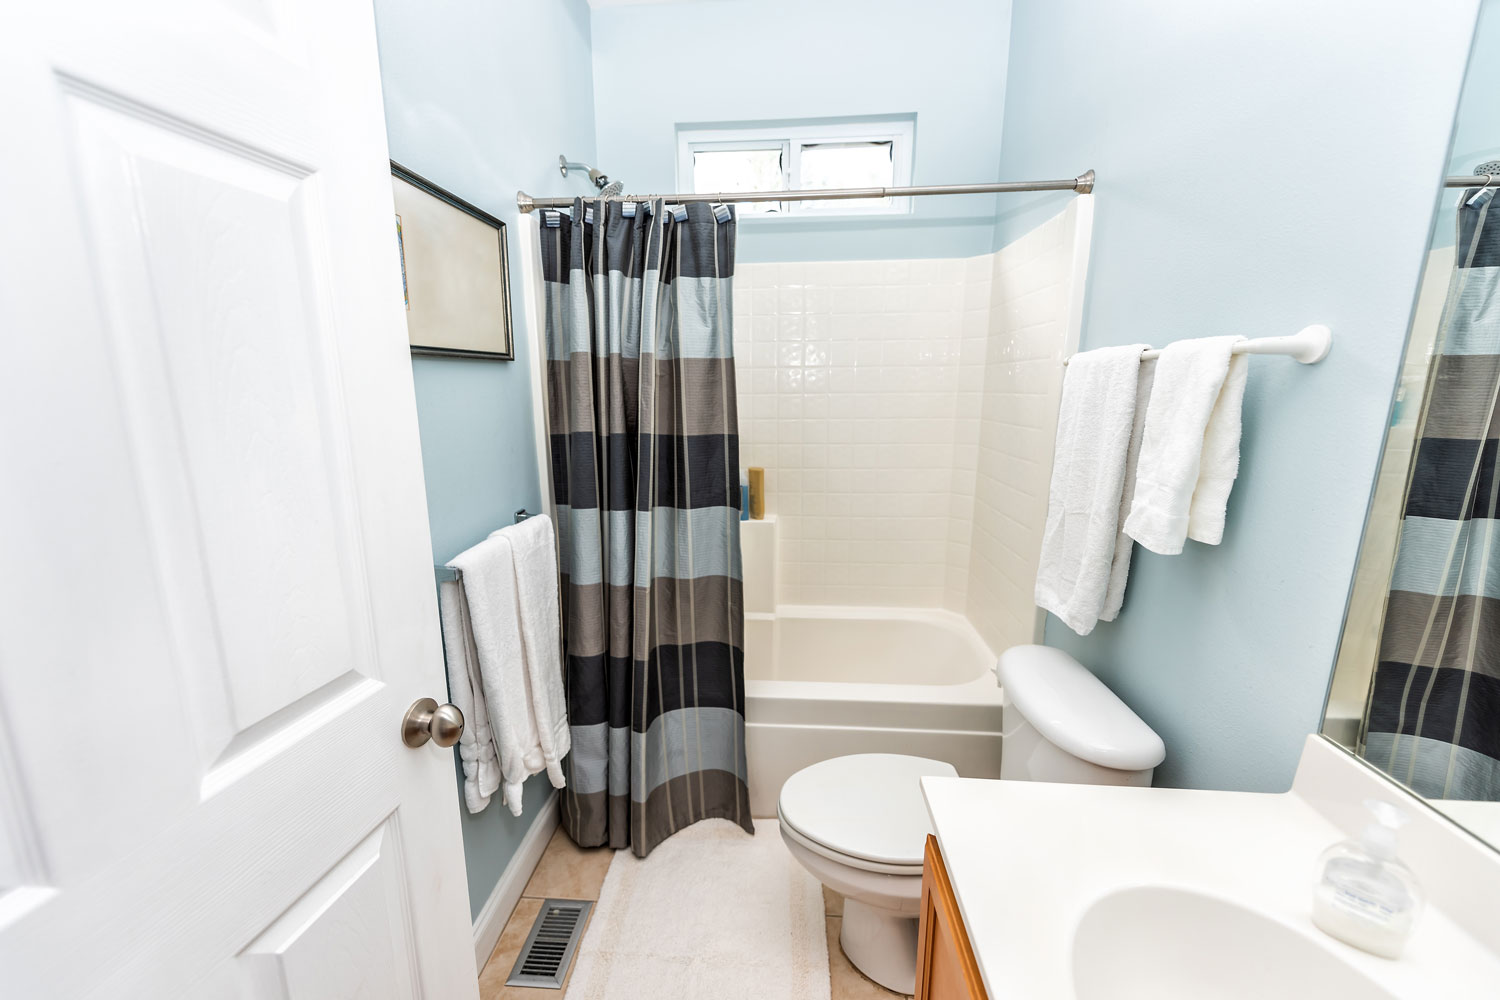 Blue painted bathroom walls with a shower curtain on the bathtub